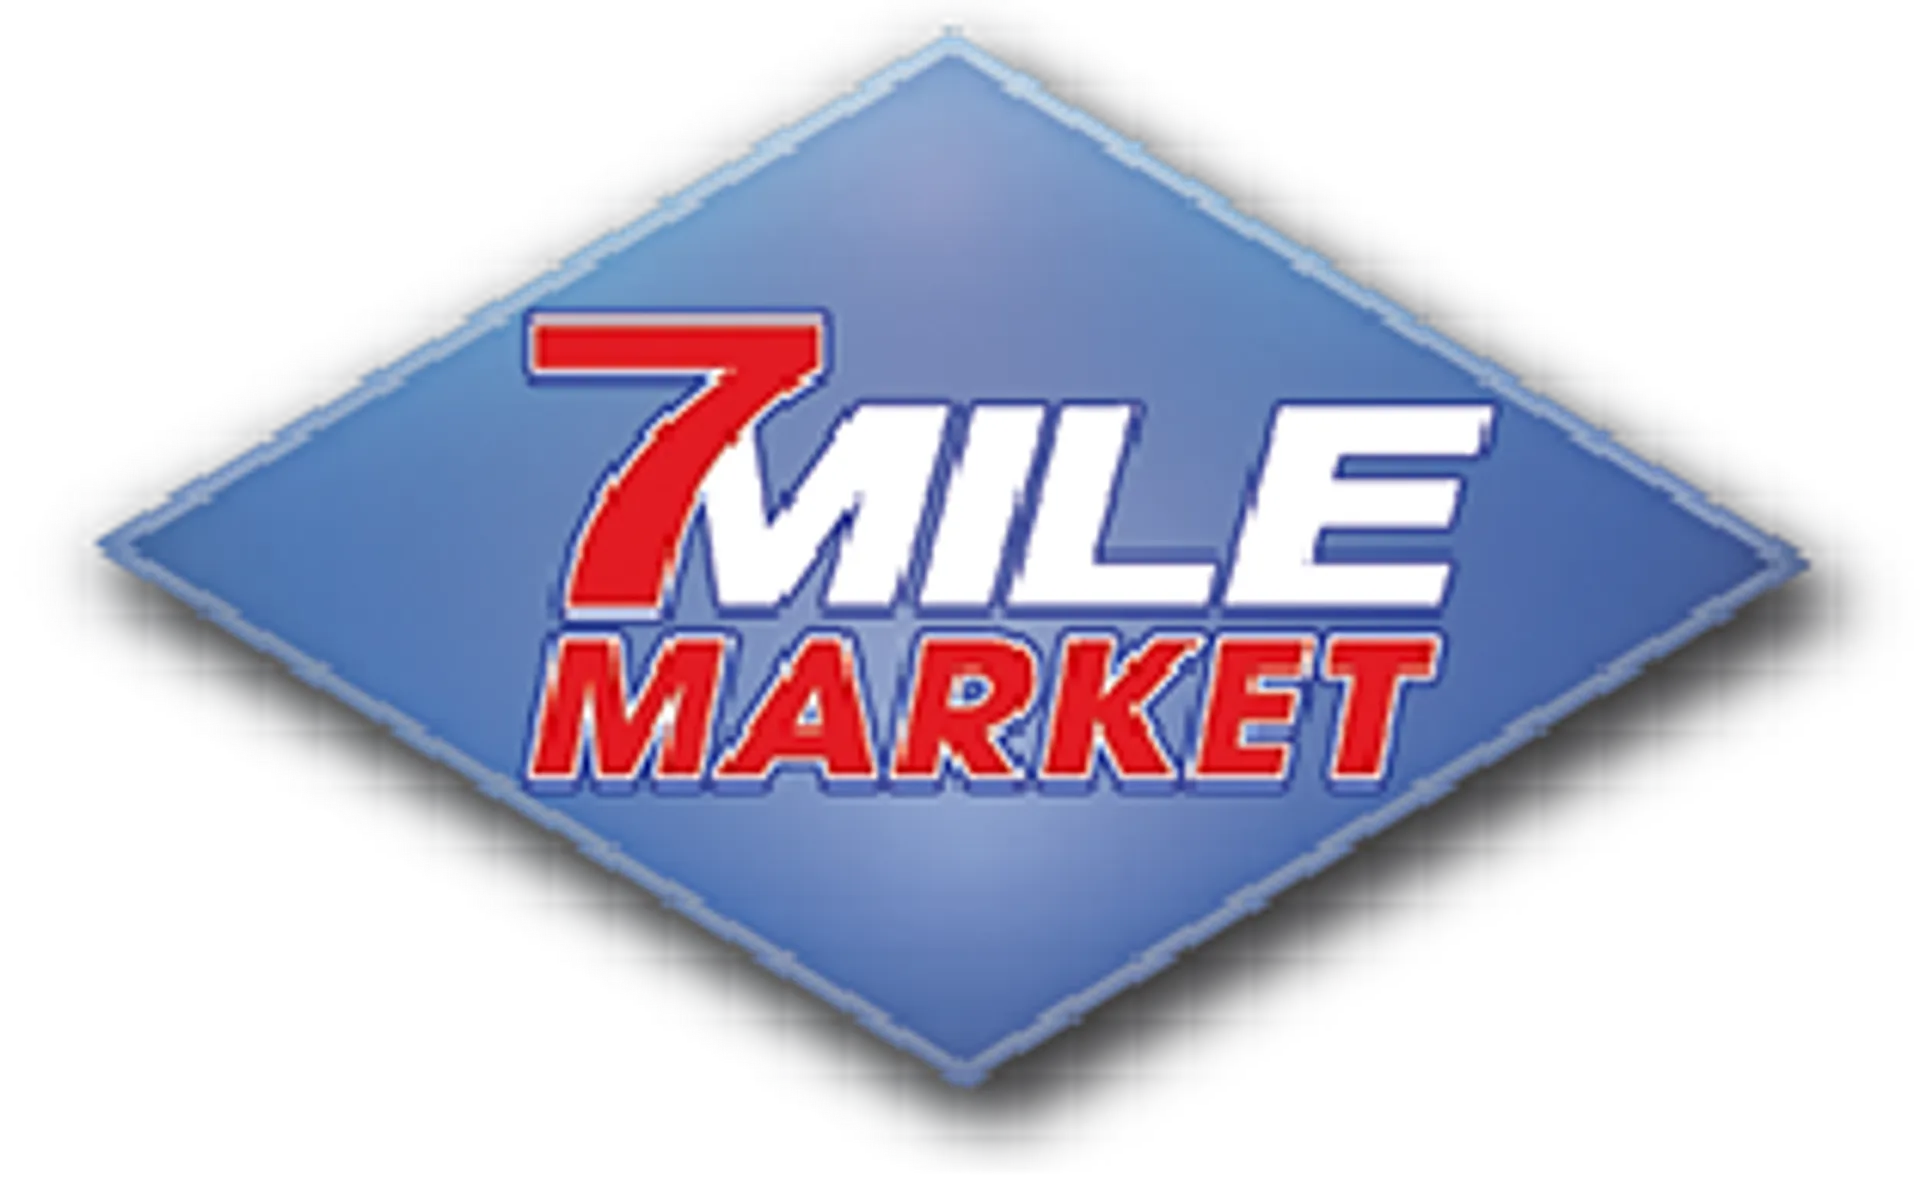 SEVEN MILE MARKET logo. Current weekly ad